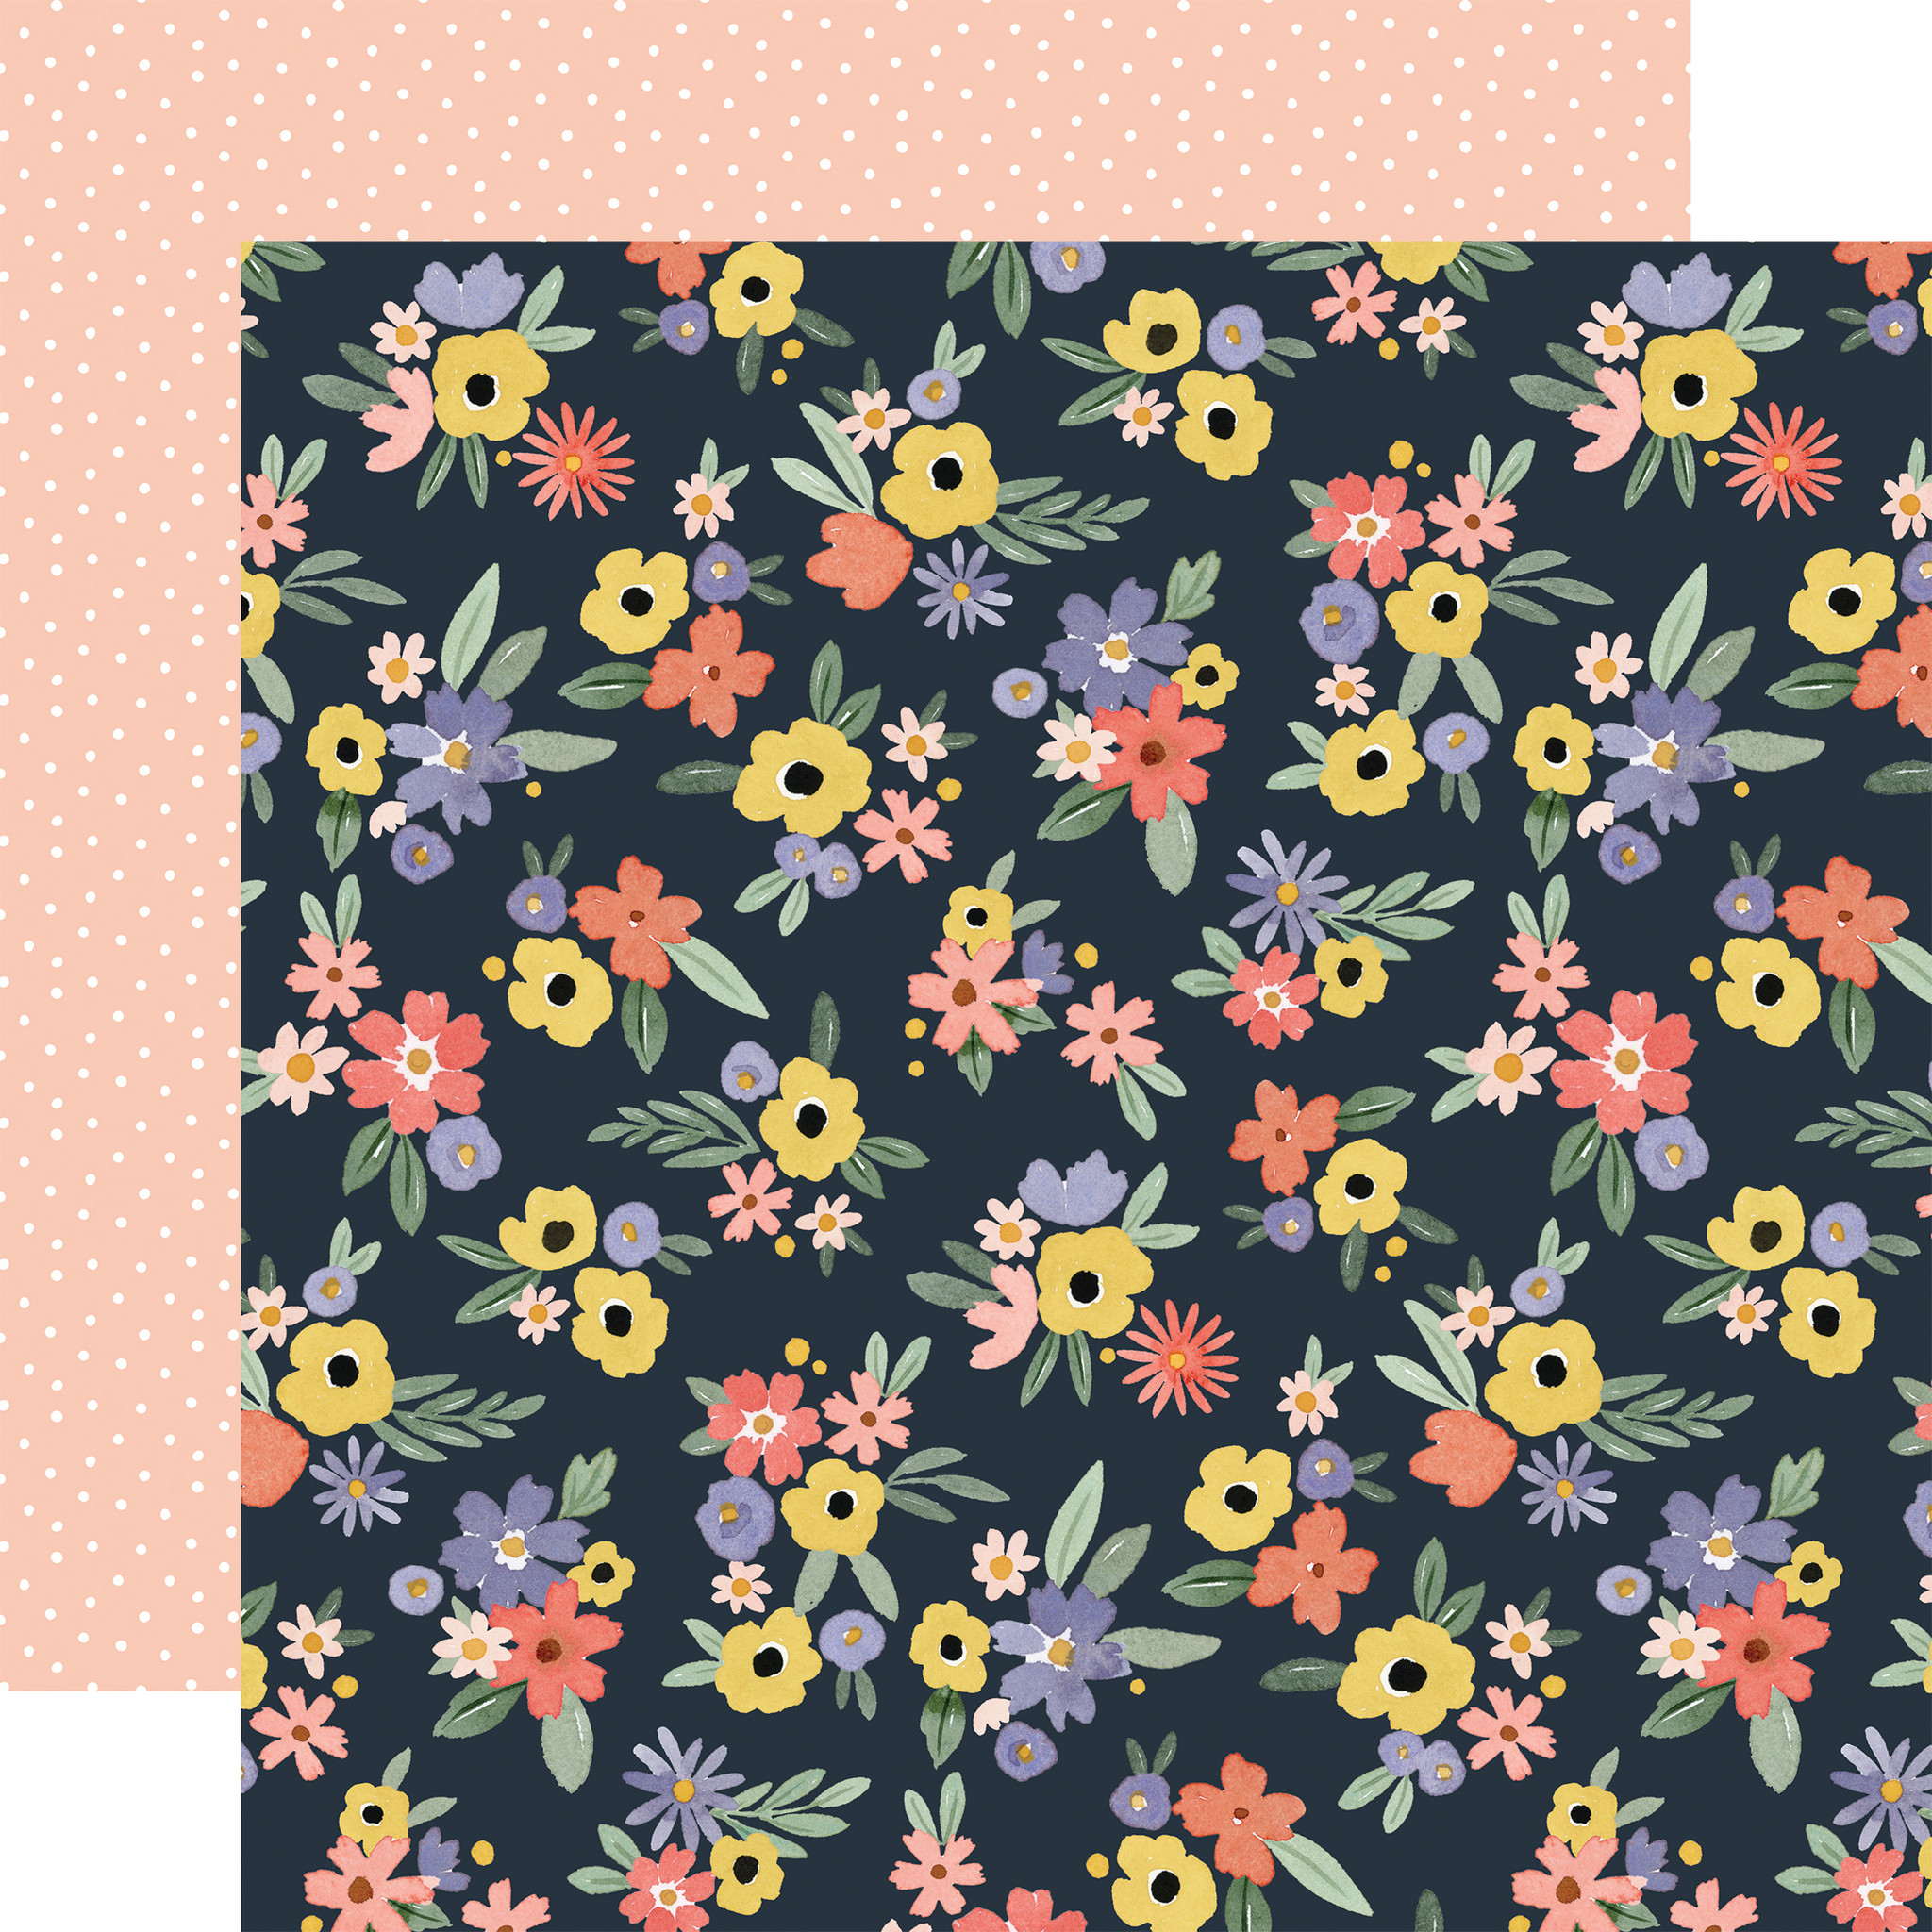 Here There and Everywhere: Bright Floral 12x12 Patterned Paper - Echo Park  Paper Co.